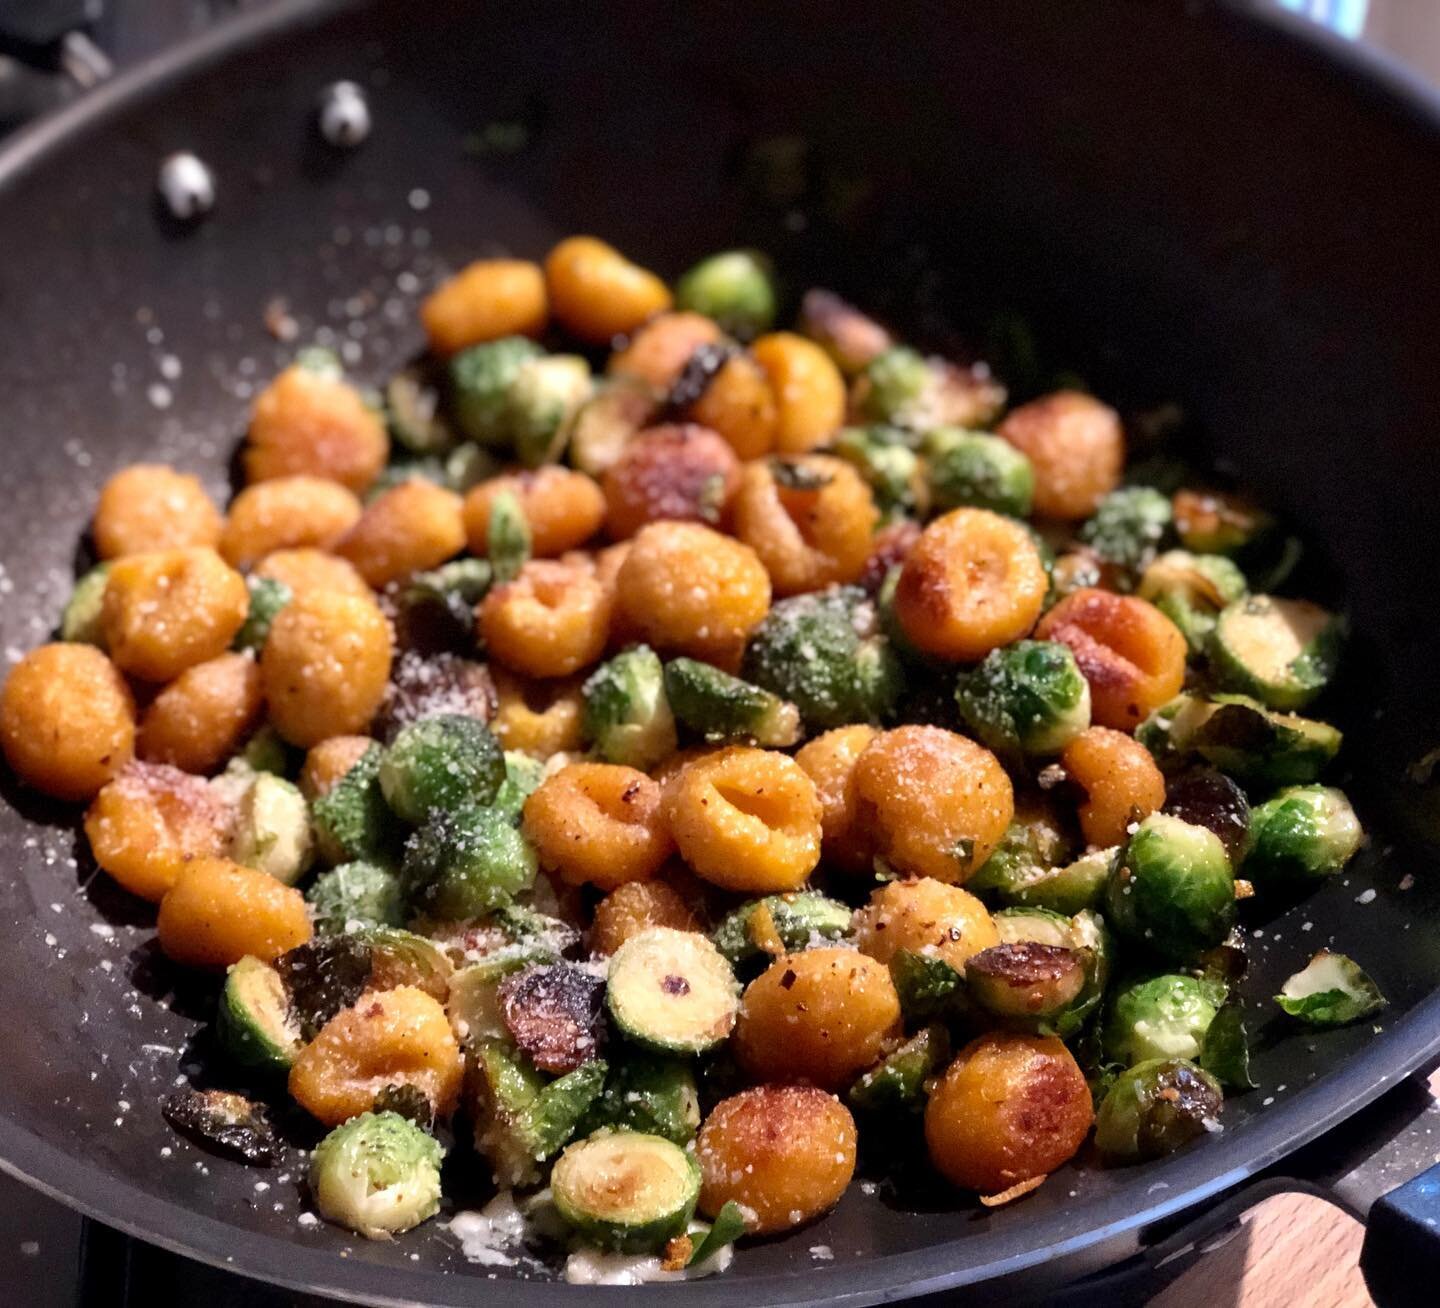 Gnocchi with Brussels Sprouts.

Buttery, cheesy, a hint of spice, a hint of sweet, a burst of lemon. Easy and elegant.

Thanks to @nytcooking for the original recipe, this one is a keeper!

Find my adapted version up now on #jennyblogs by clicking on